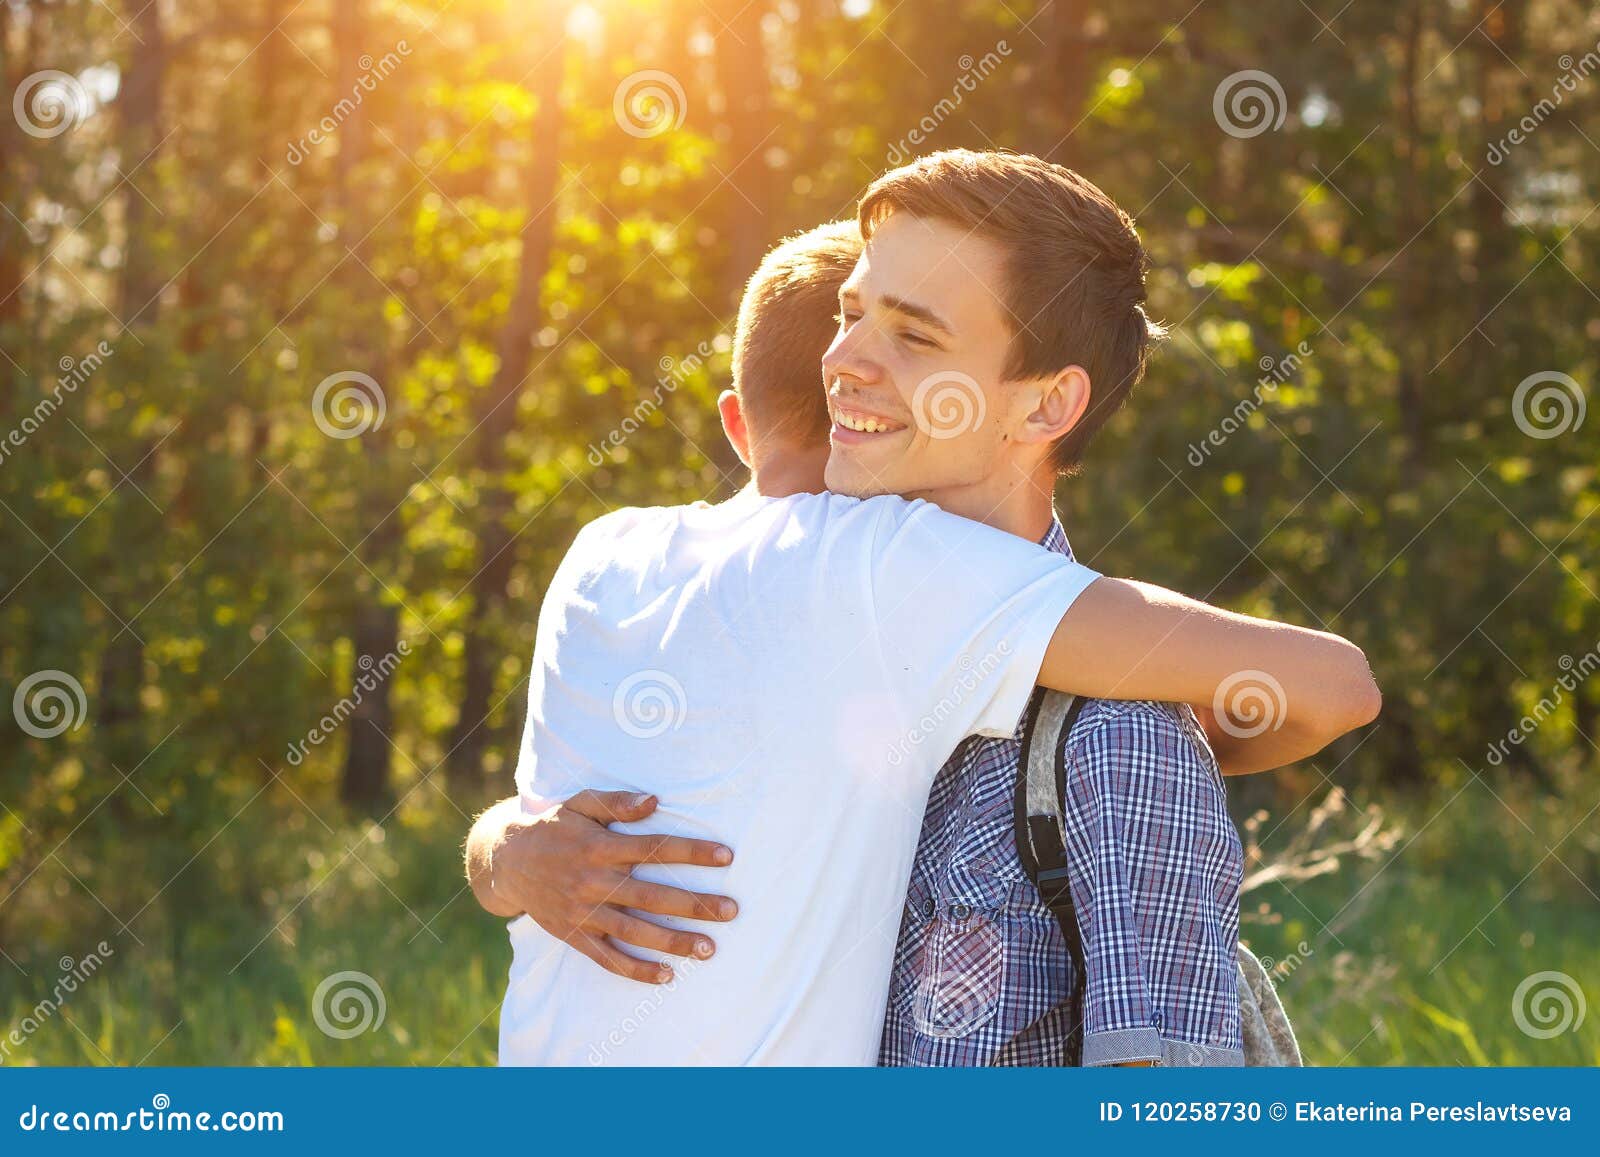 Two Guys Friends Hugging When Meeting The Concept Of Happiness Stock